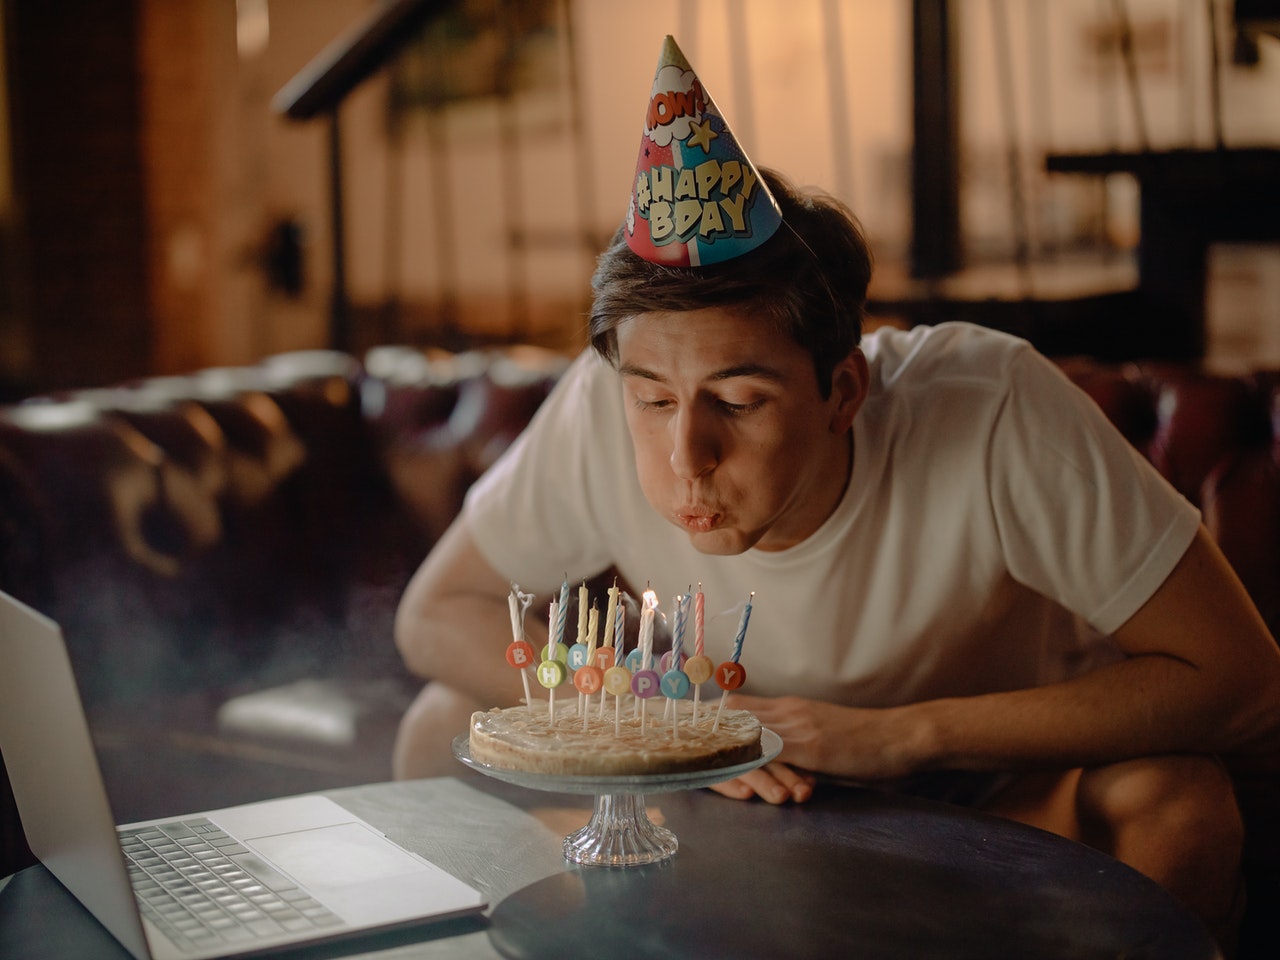 real estate client receiving birthday email from realtor